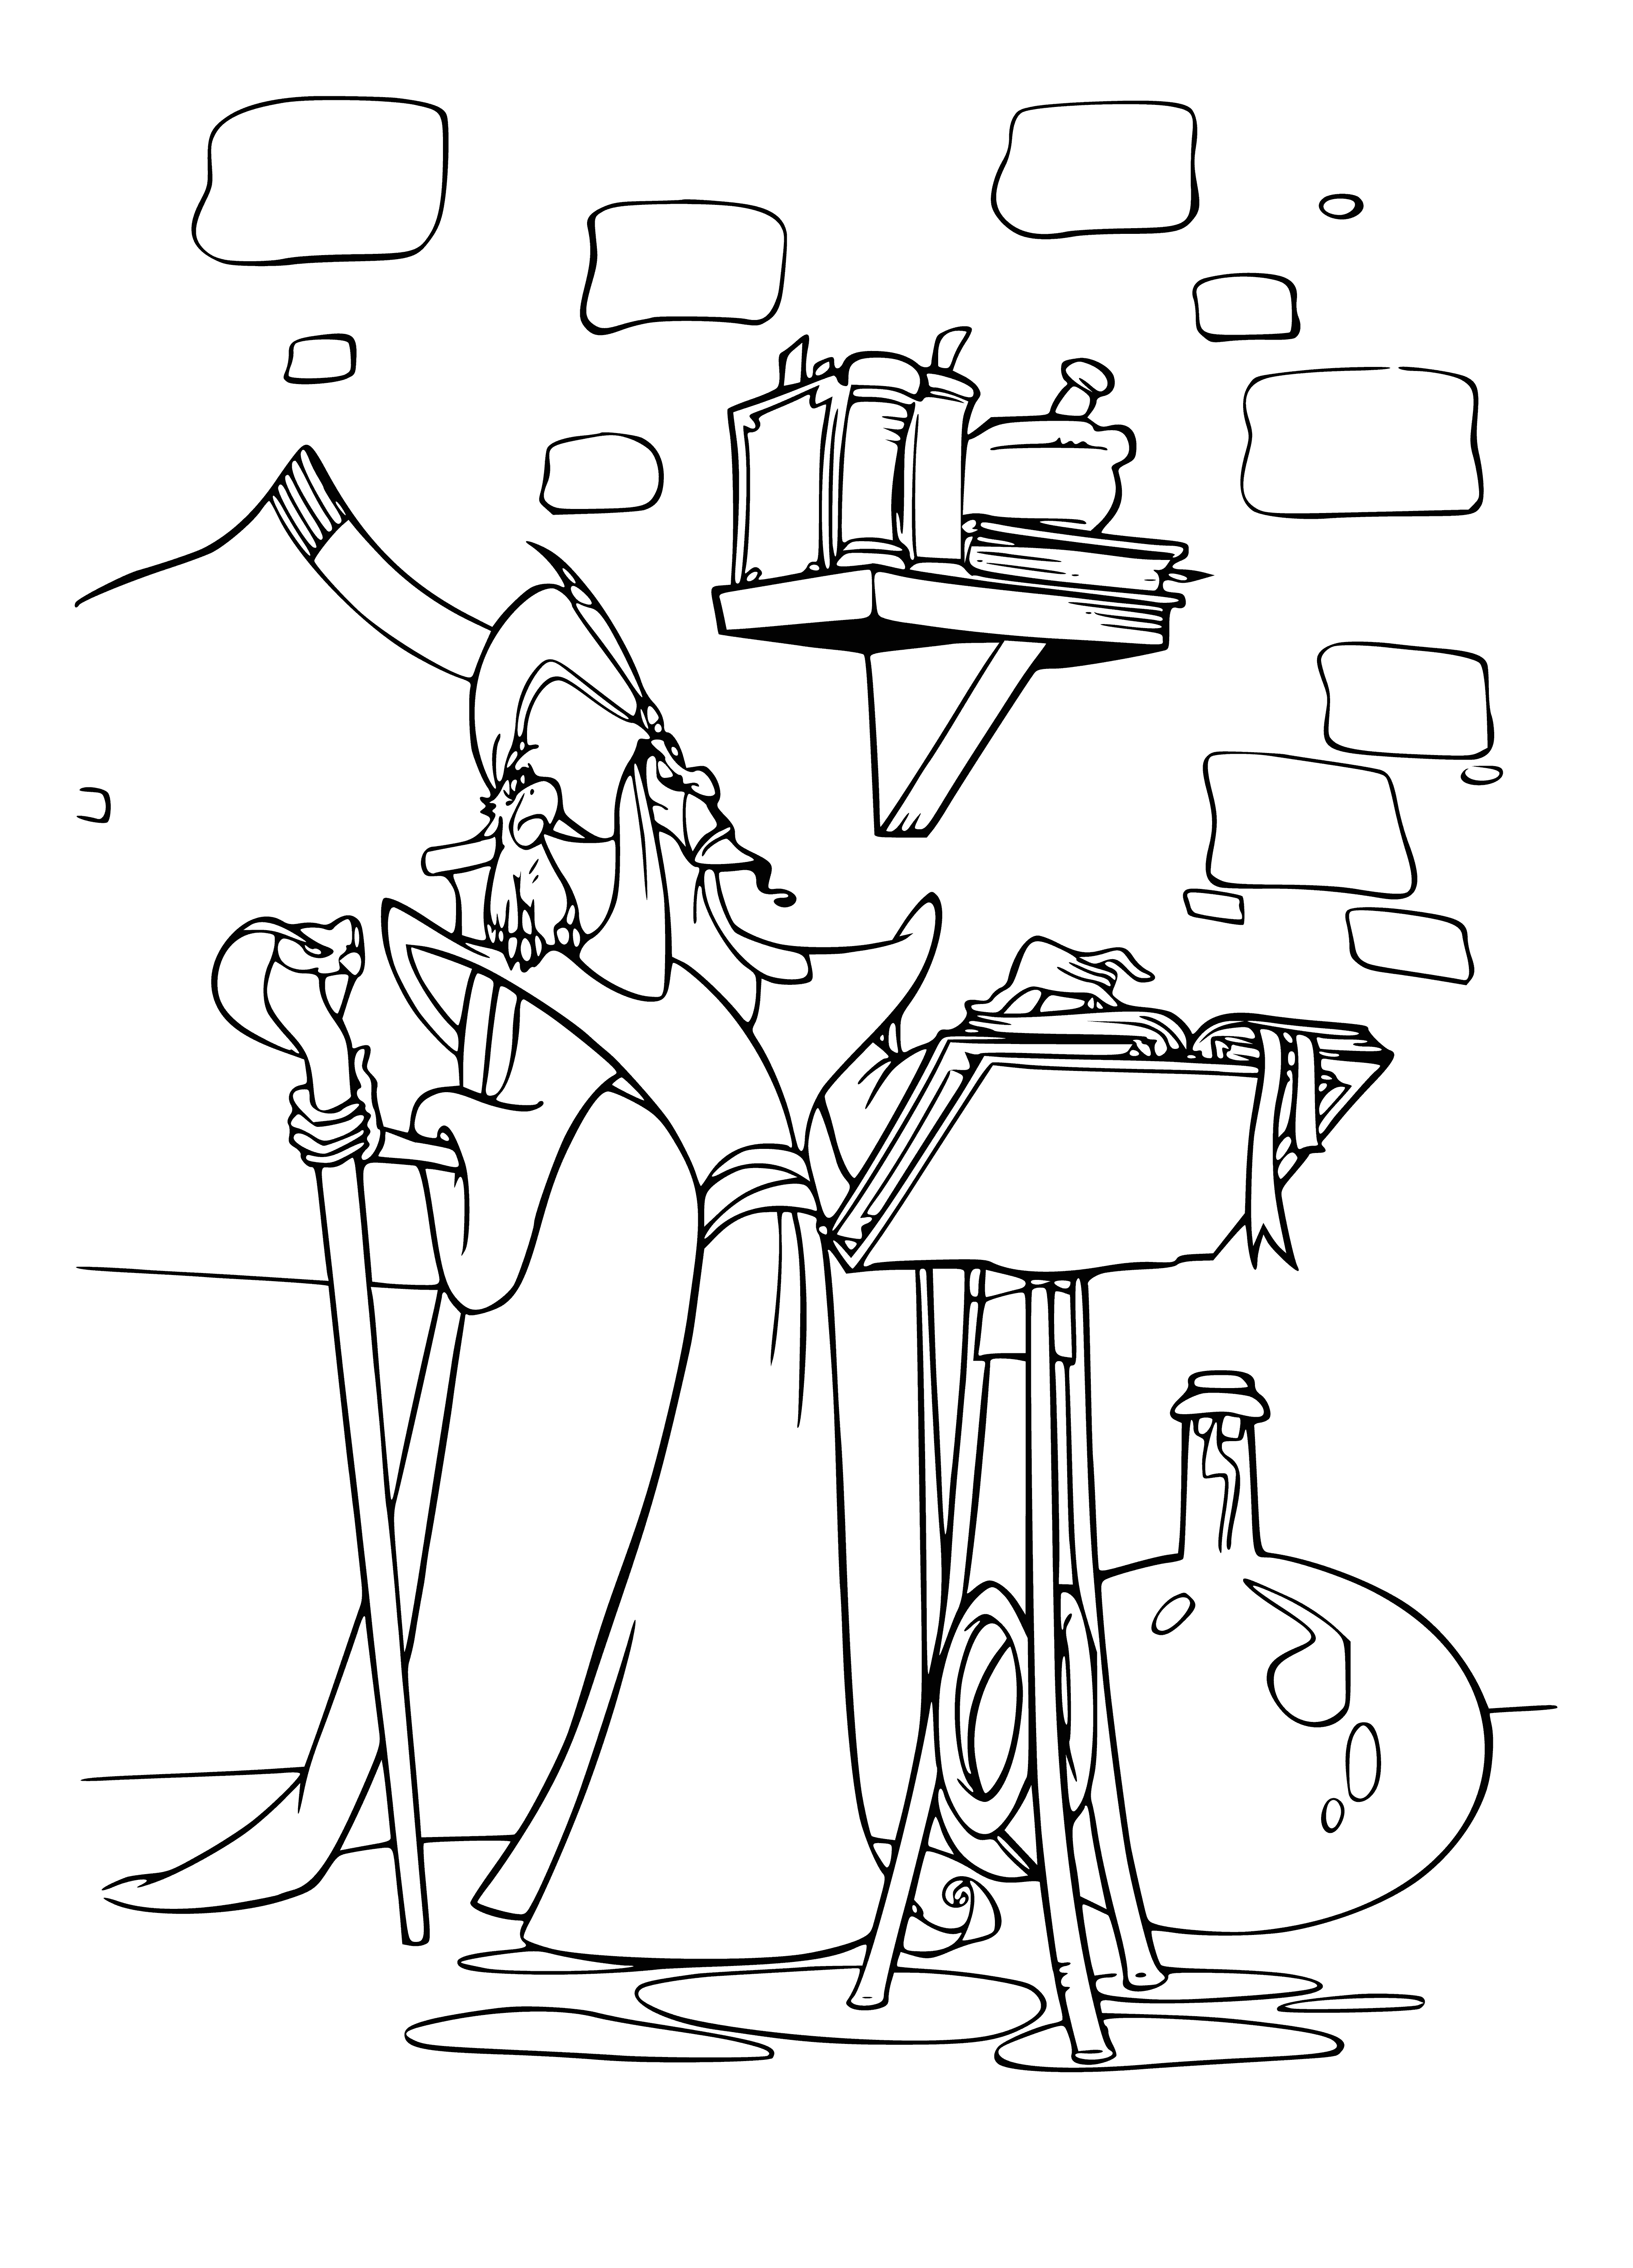 coloring page: Jafar and Iago plotted evil schemes in traditional Arabian clothing - Jafar with a scruffy beard and Iago as a colorful bird with yellow eyes.